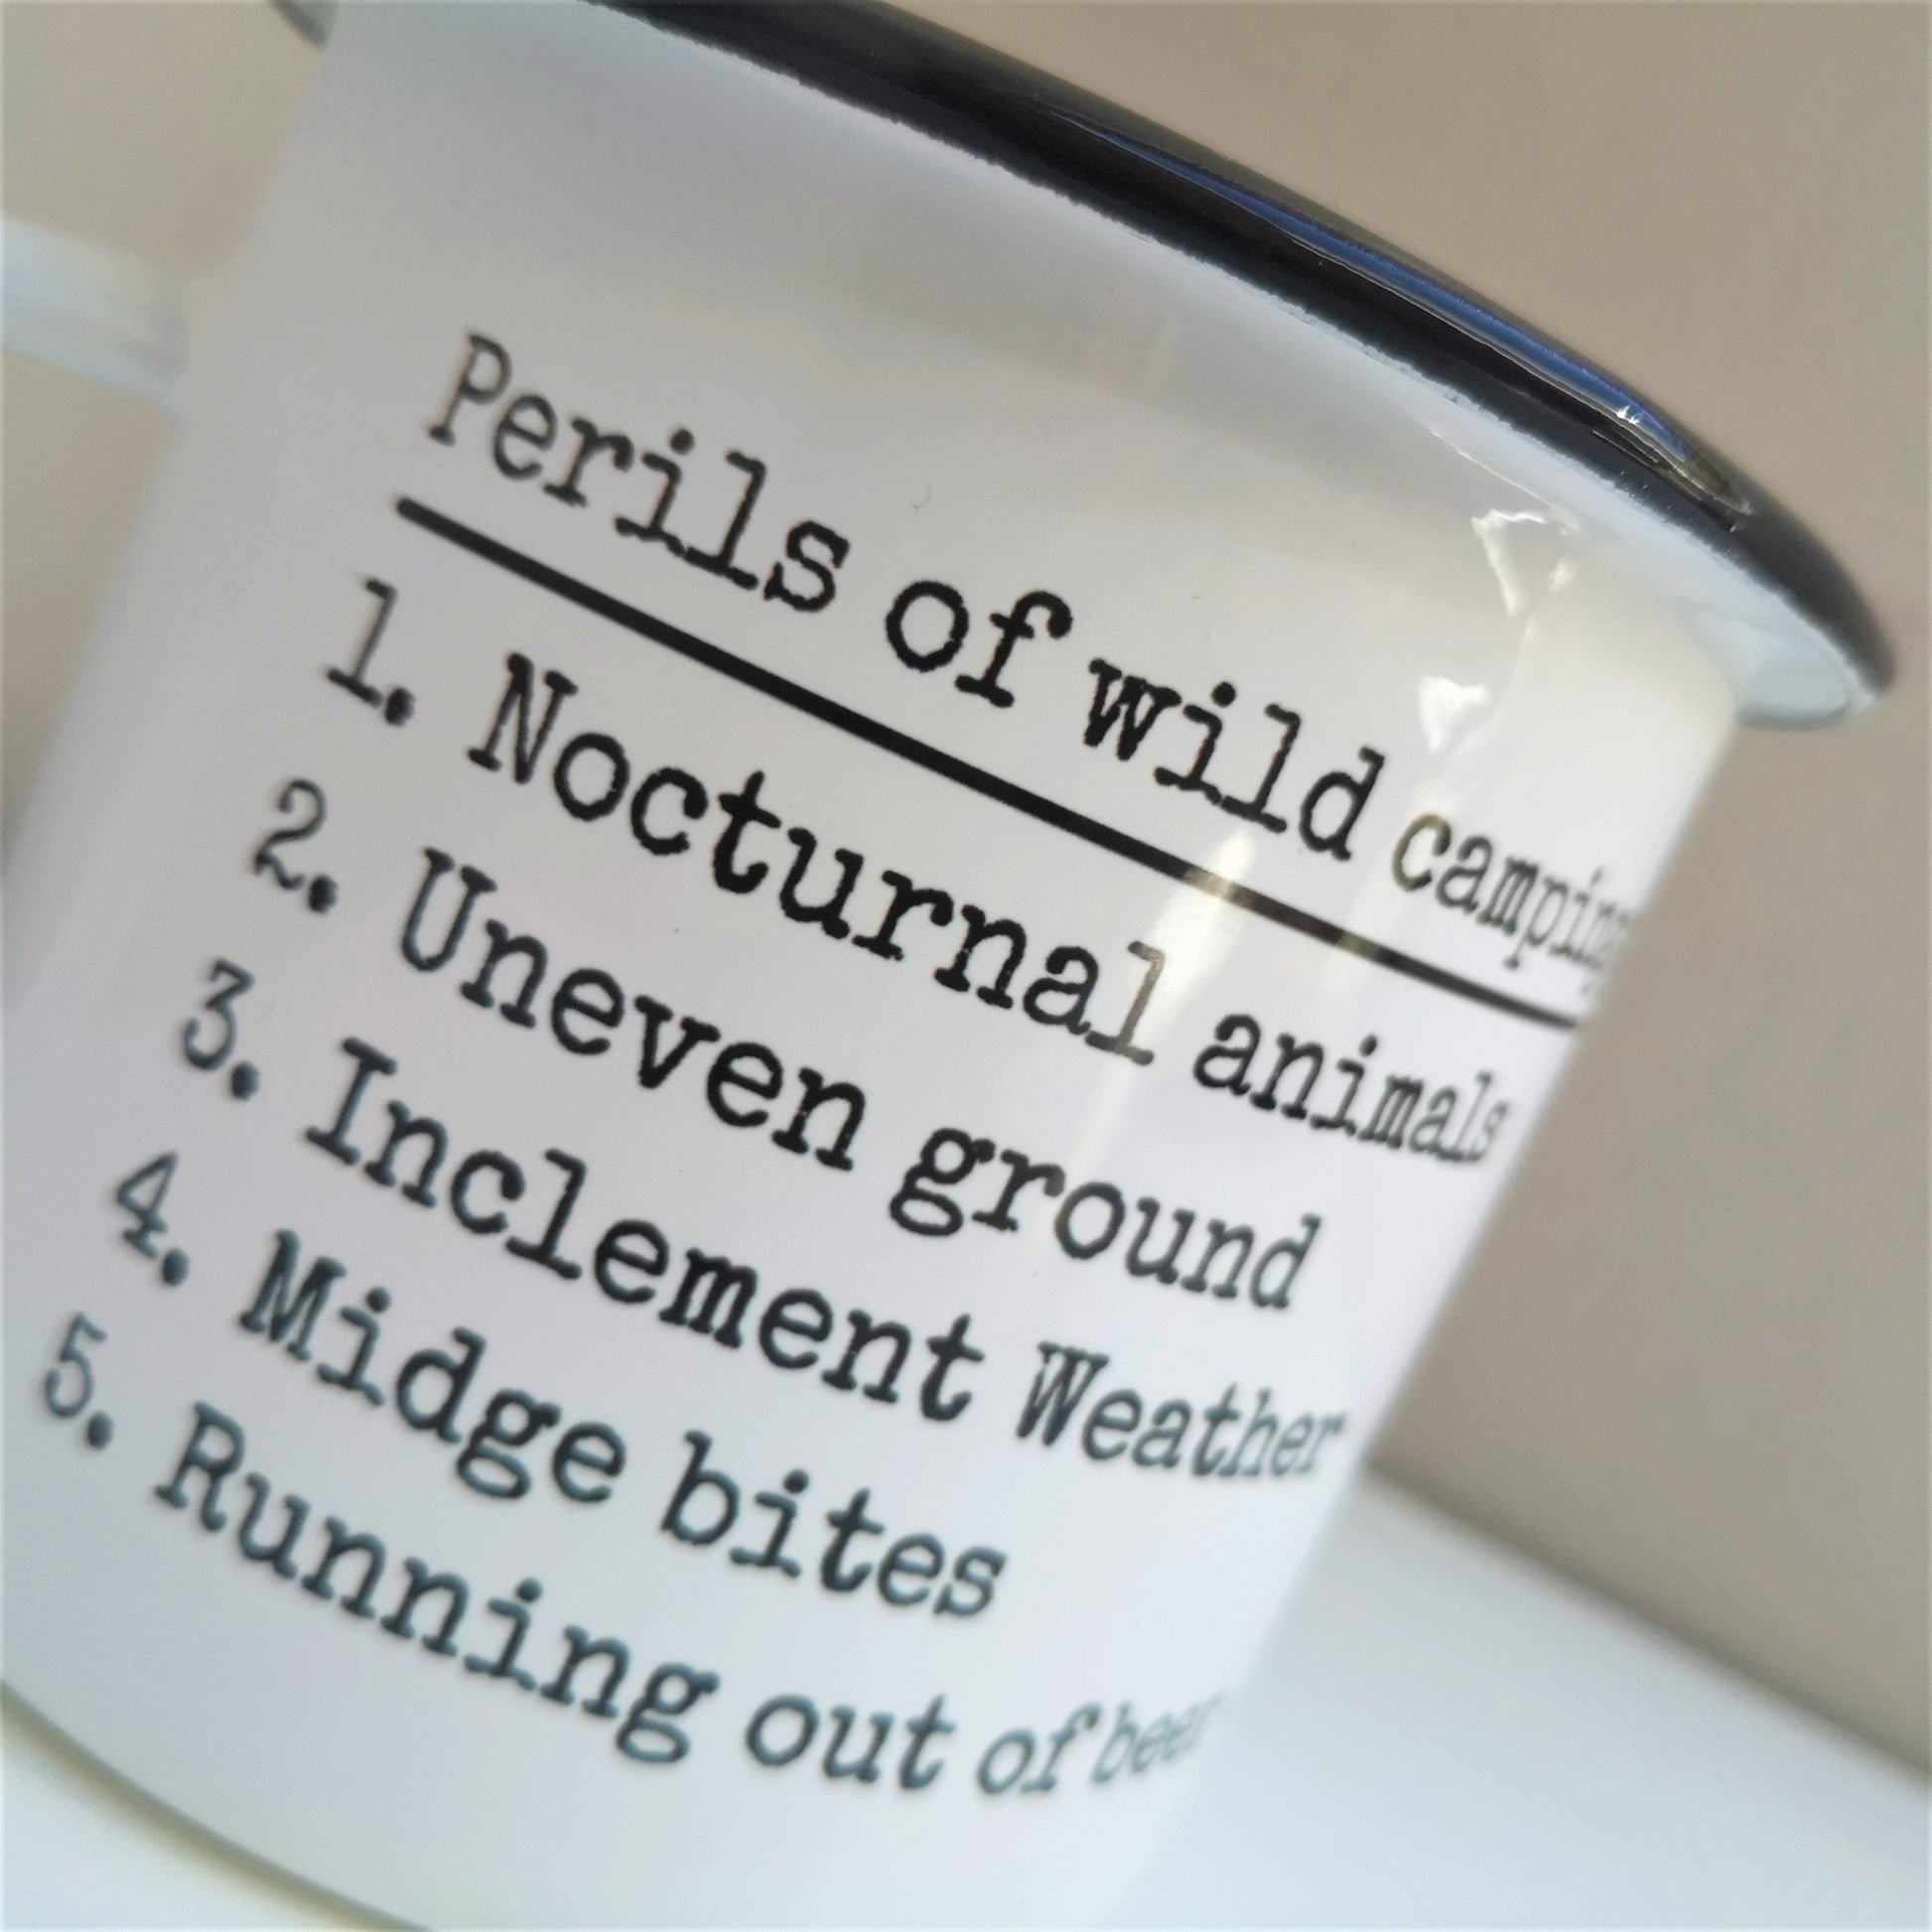 A close up photo of a White enamel mug with a black rim with the following on the front -Perils of wild camping: Nocturnal Animals, Uneven ground, Inclement weather, midget bits, Running out of beer